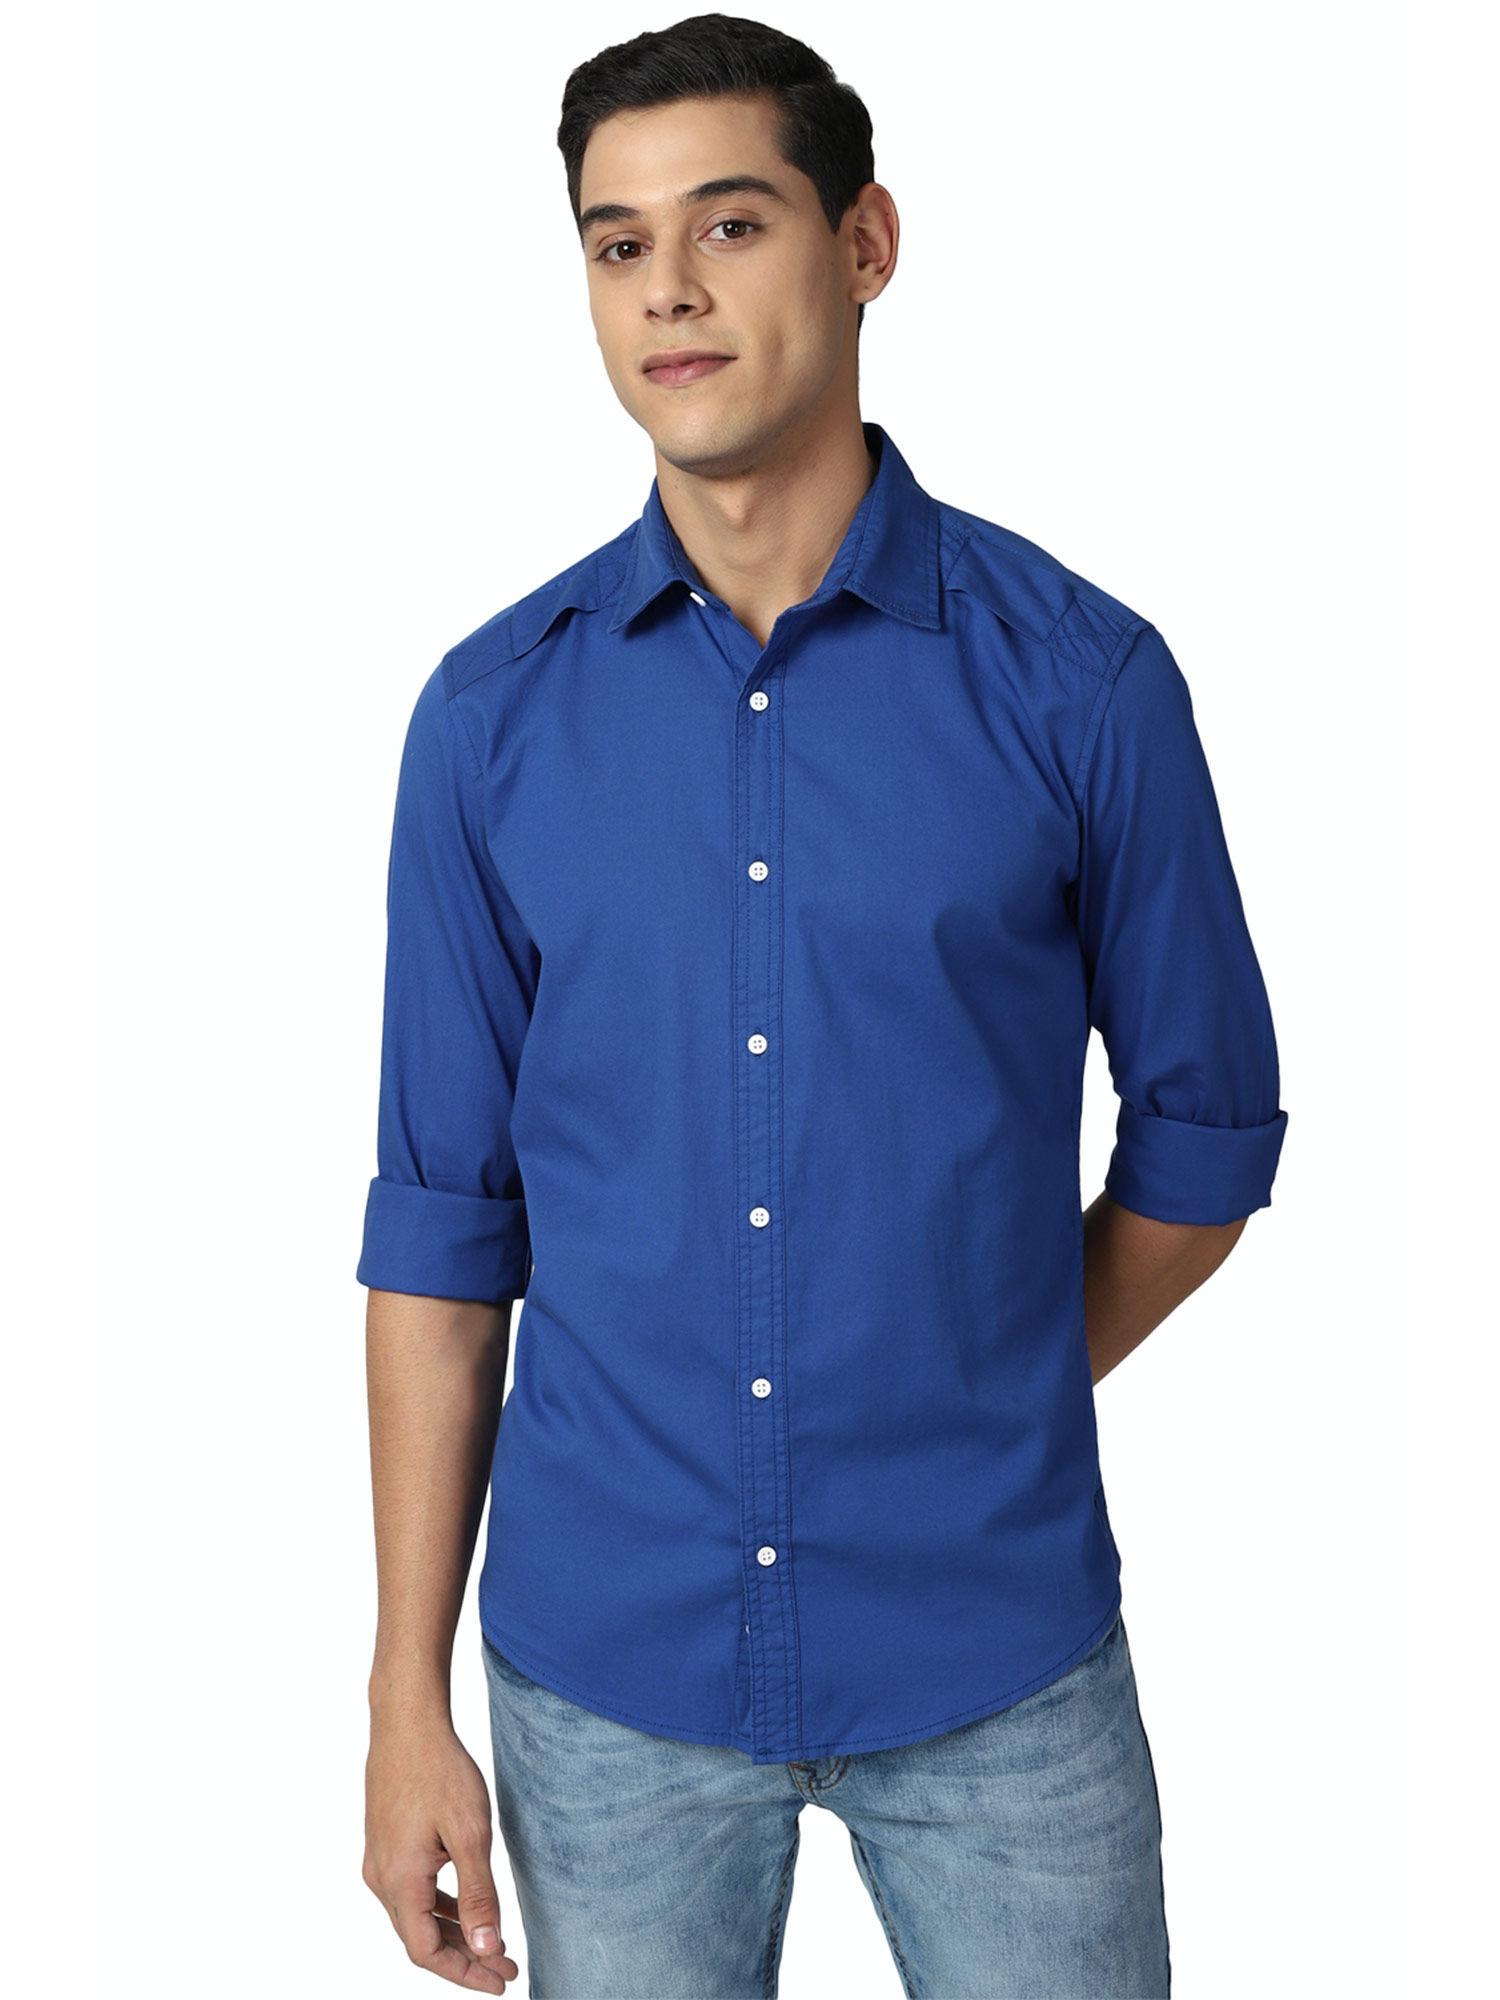 peter england blue full sleeves casual shirt